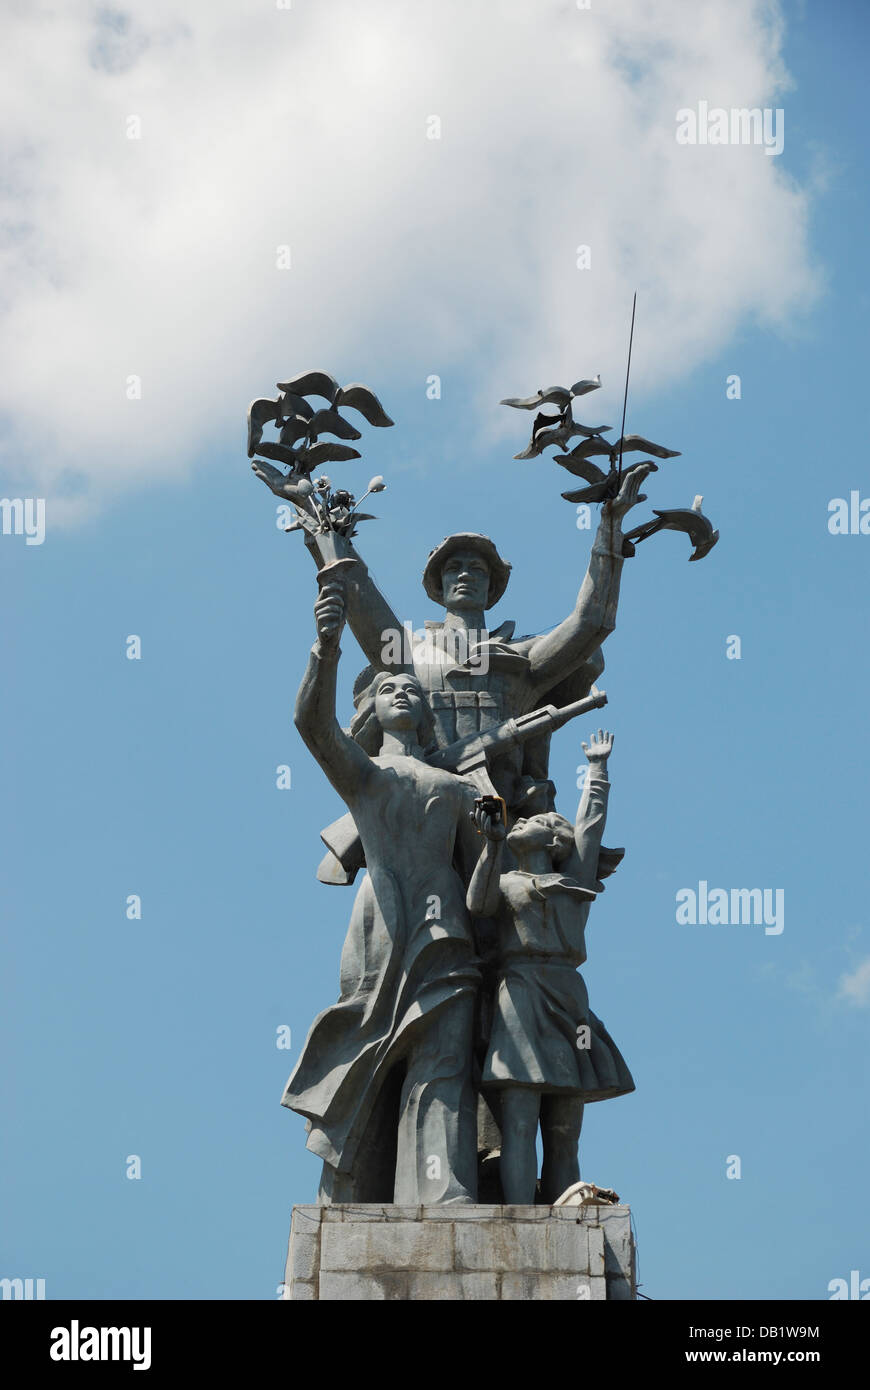 Monument in Nha Trang celebrating the 20th anniversary of the liberation of Kanh Hoa Province at the end of the Vietnam War. Stock Photo